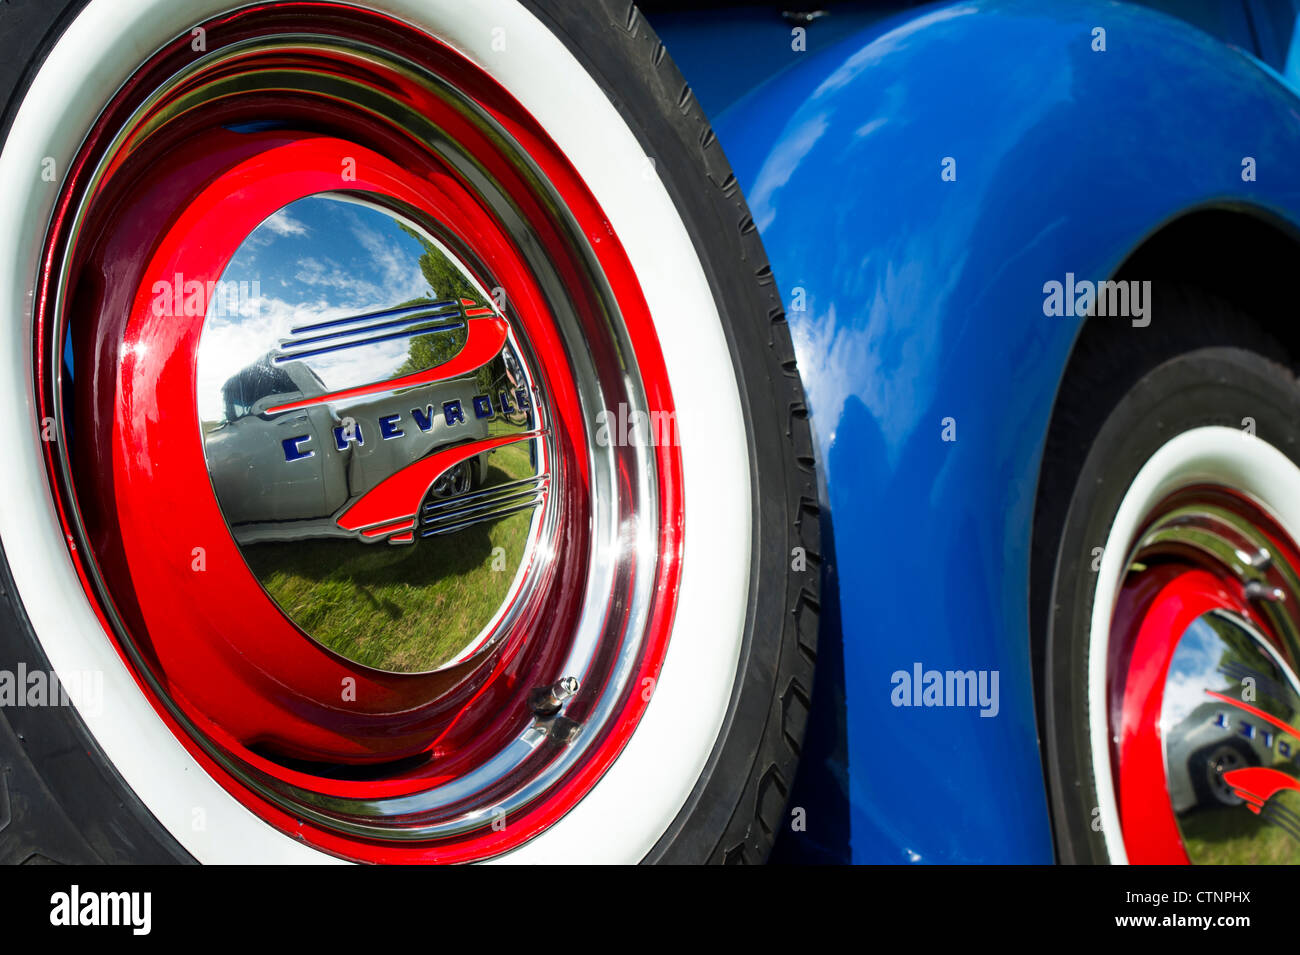 1939 Chevrolet pick up truck. Chevy. Classic American pickup. Spare wheel detail Stock Photo